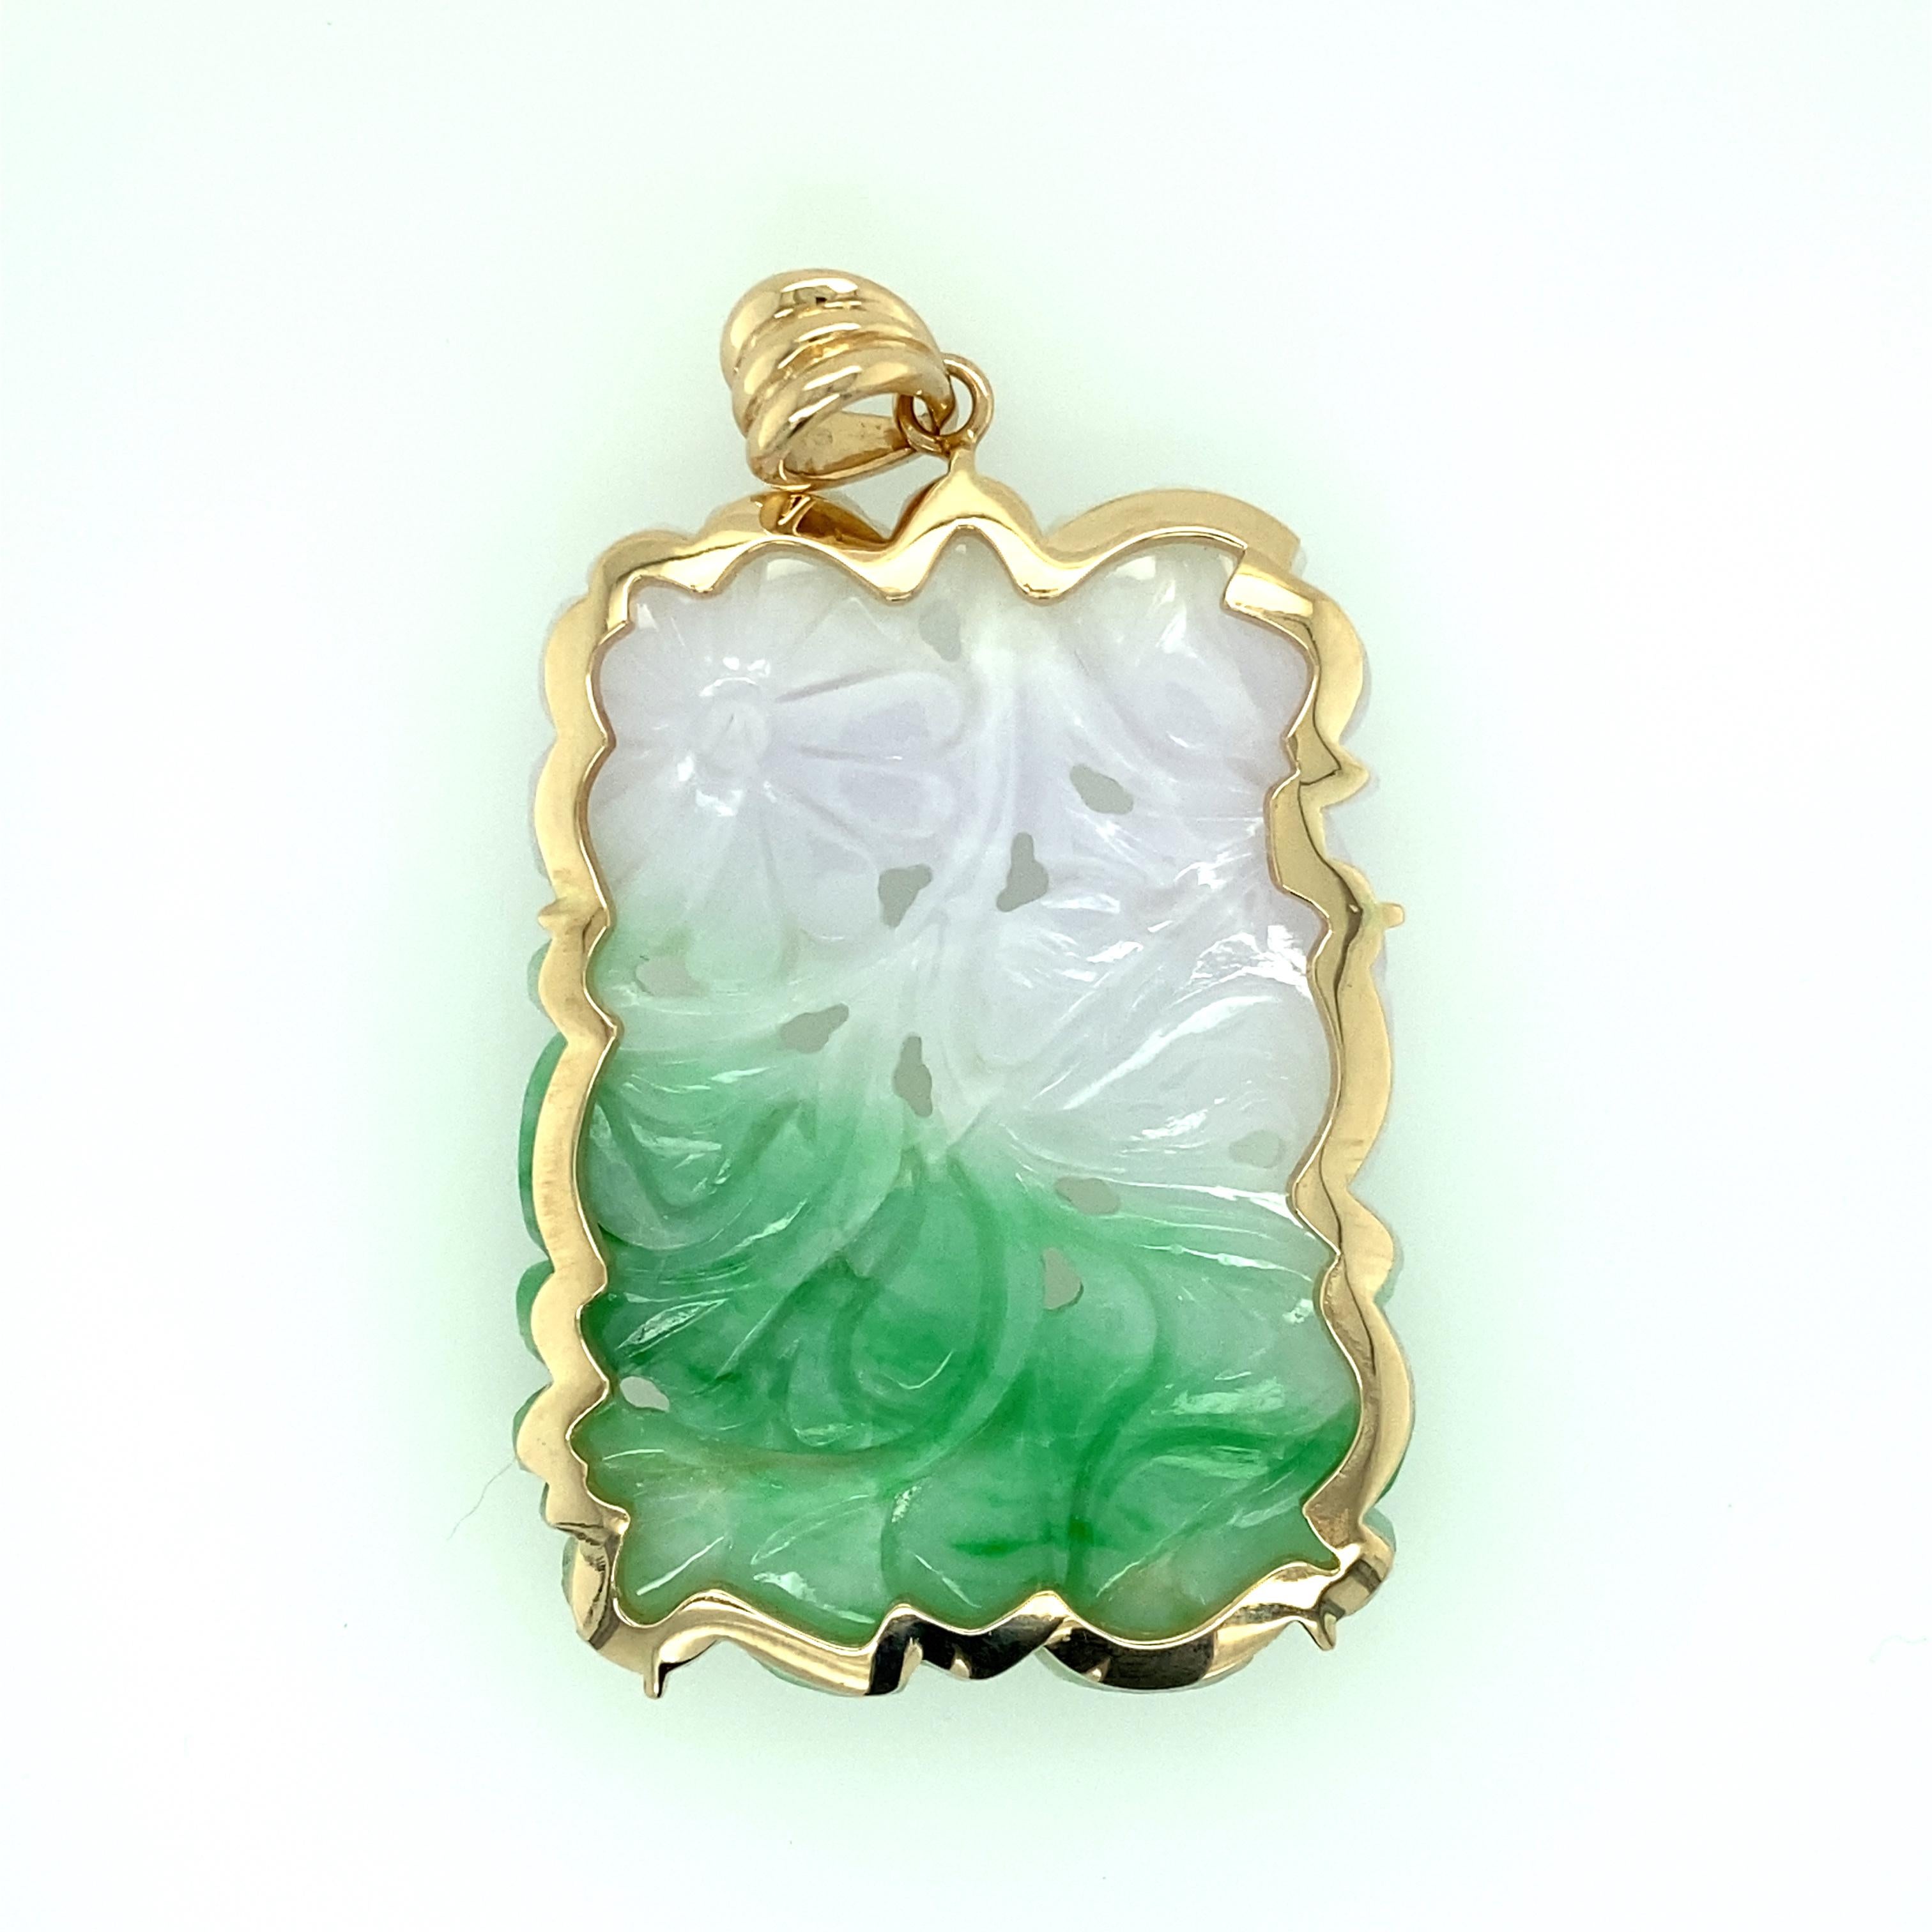 One 14 karat yellow gold (stamped 14K) estate white and green carved flower motif  jadeite pendant. The pendant measures 2 inches long and 1.5 inches wide.